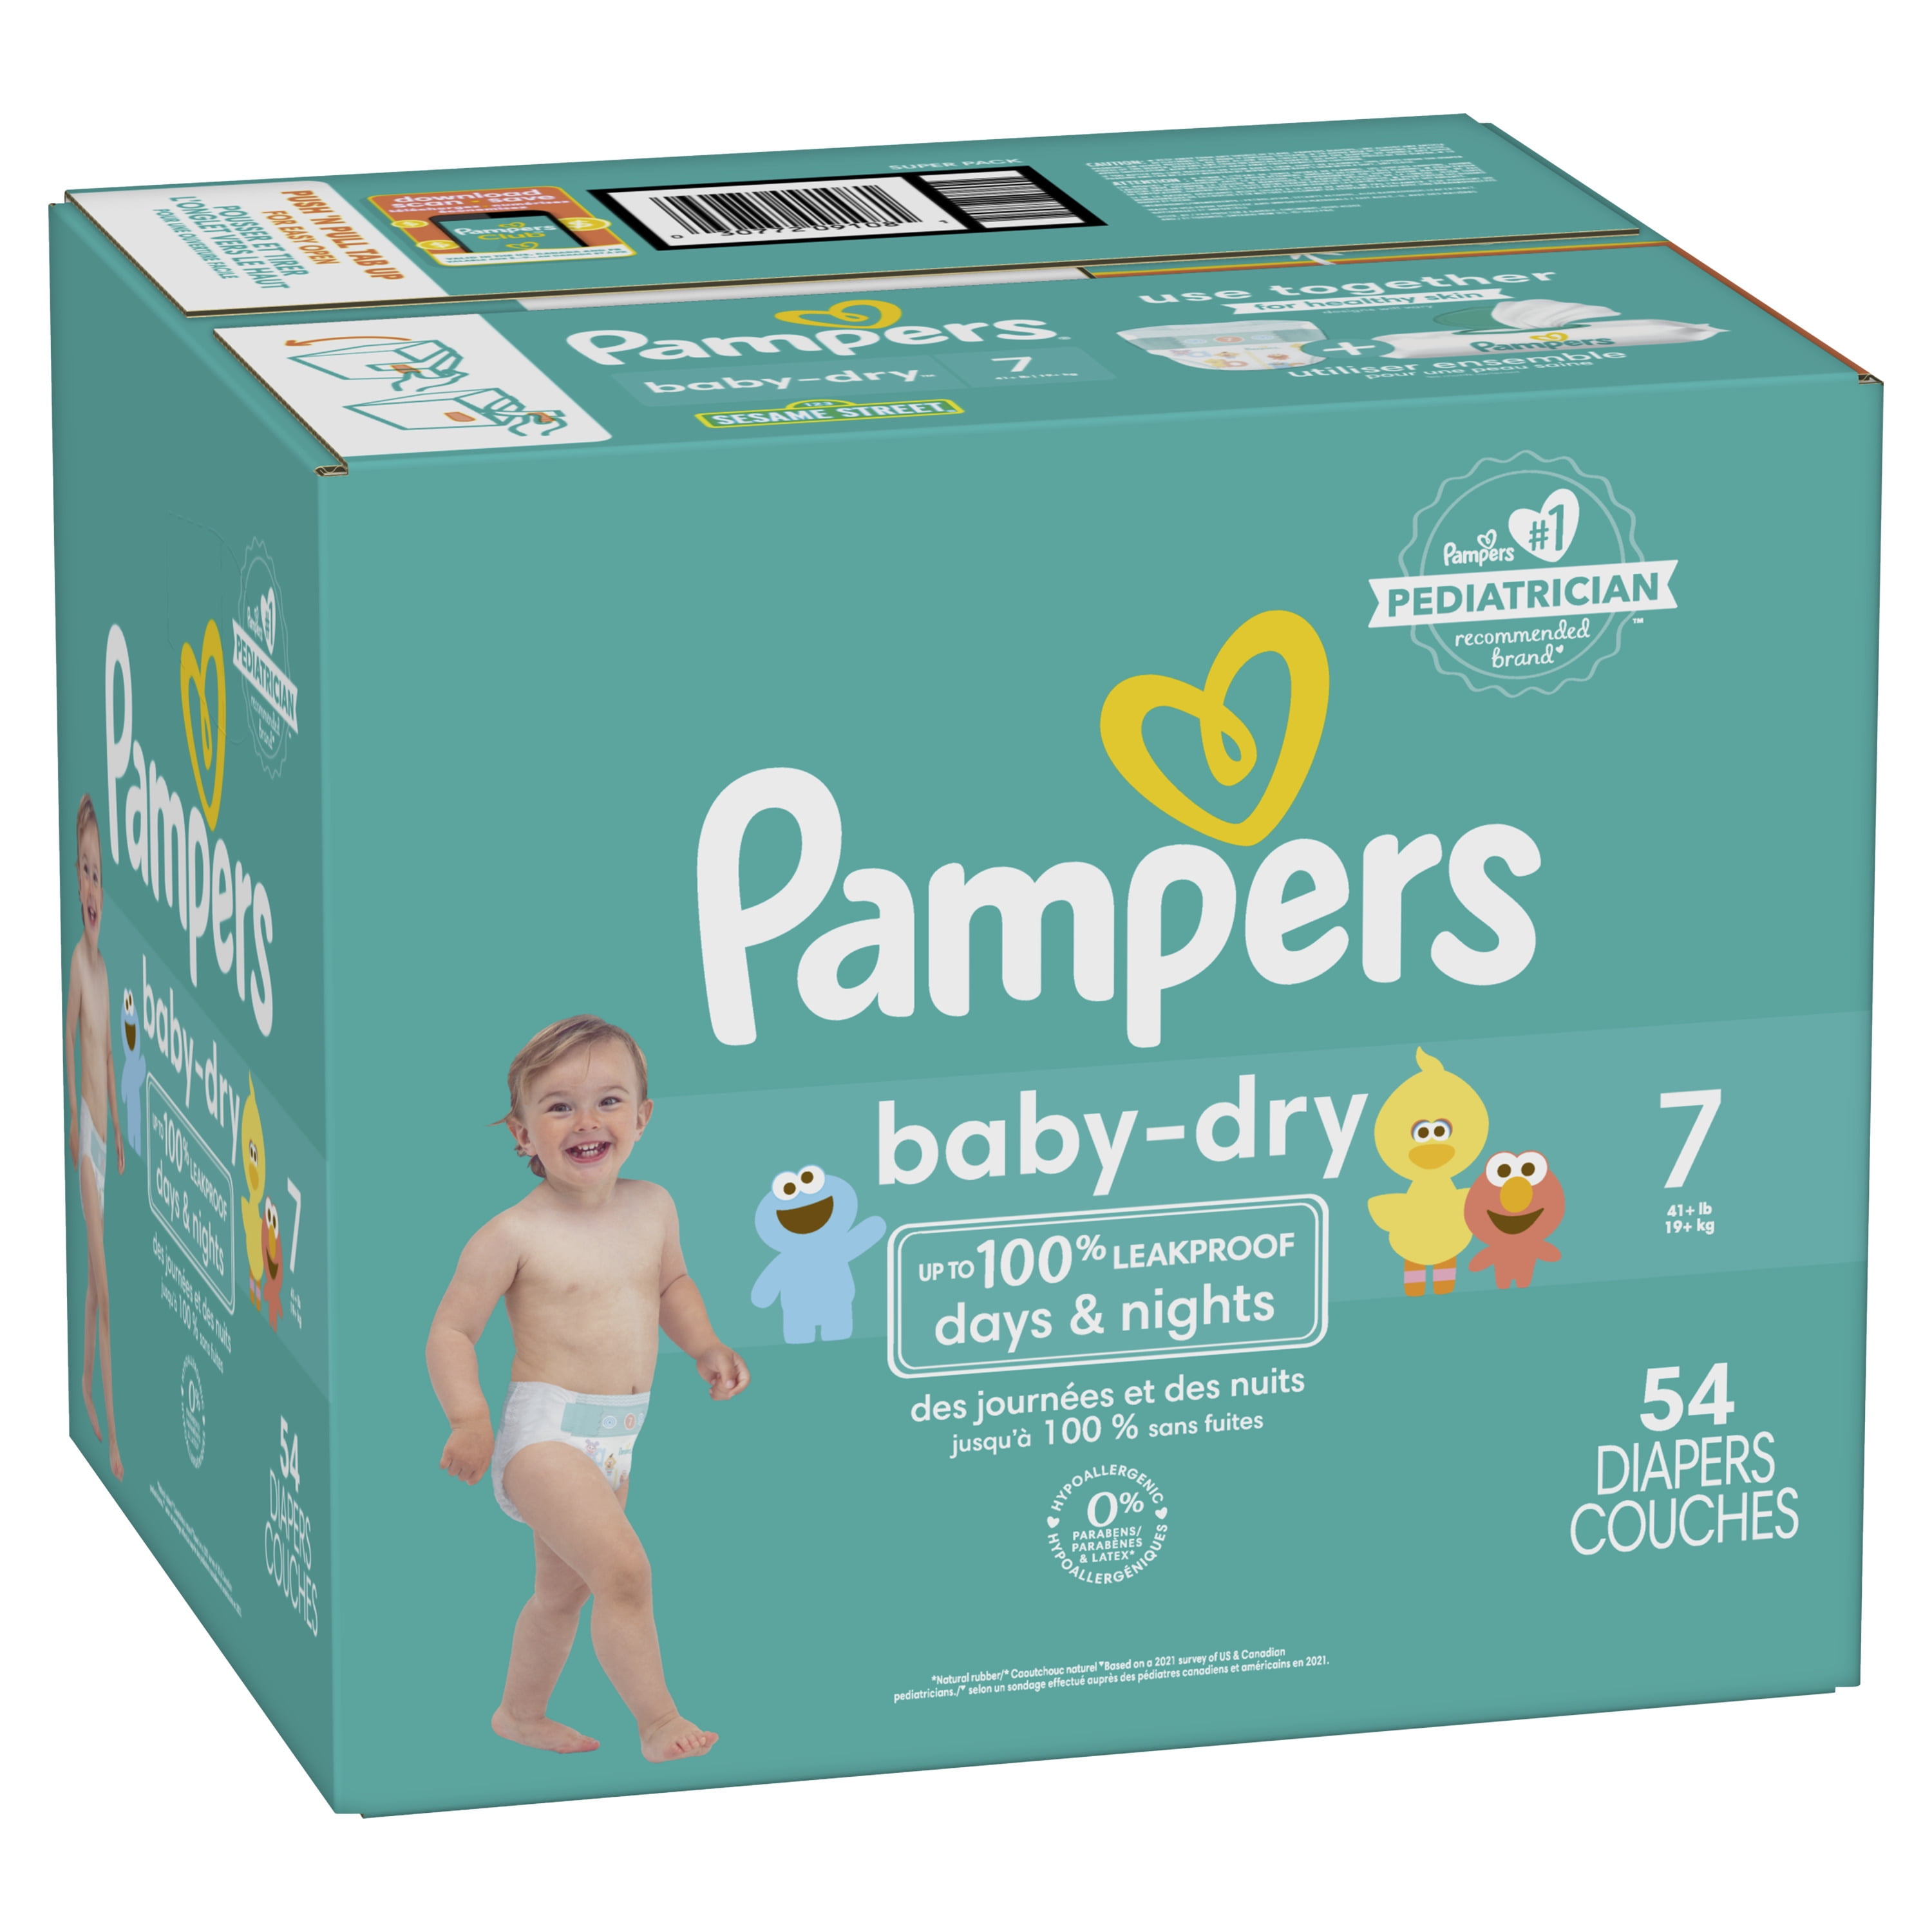 Prescription appetite Belong Pampers Baby Dry Diapers Size 7, 54 Count (Select for More Options) -  Walmart.com